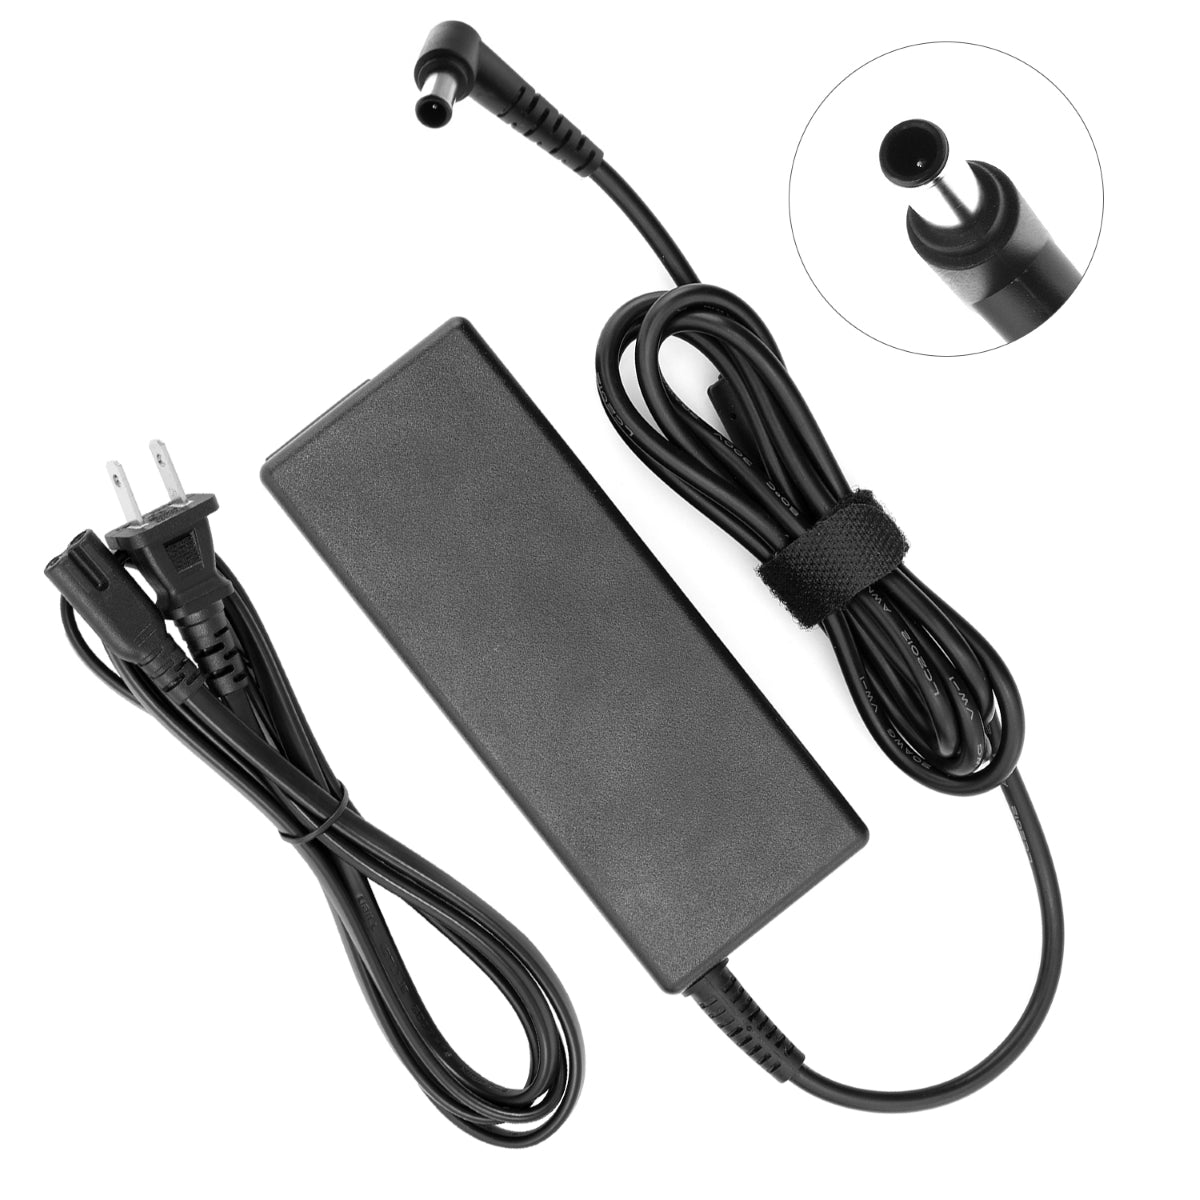 Power Adapter for Samsung LC24FG73FQNXZA Monitor TV